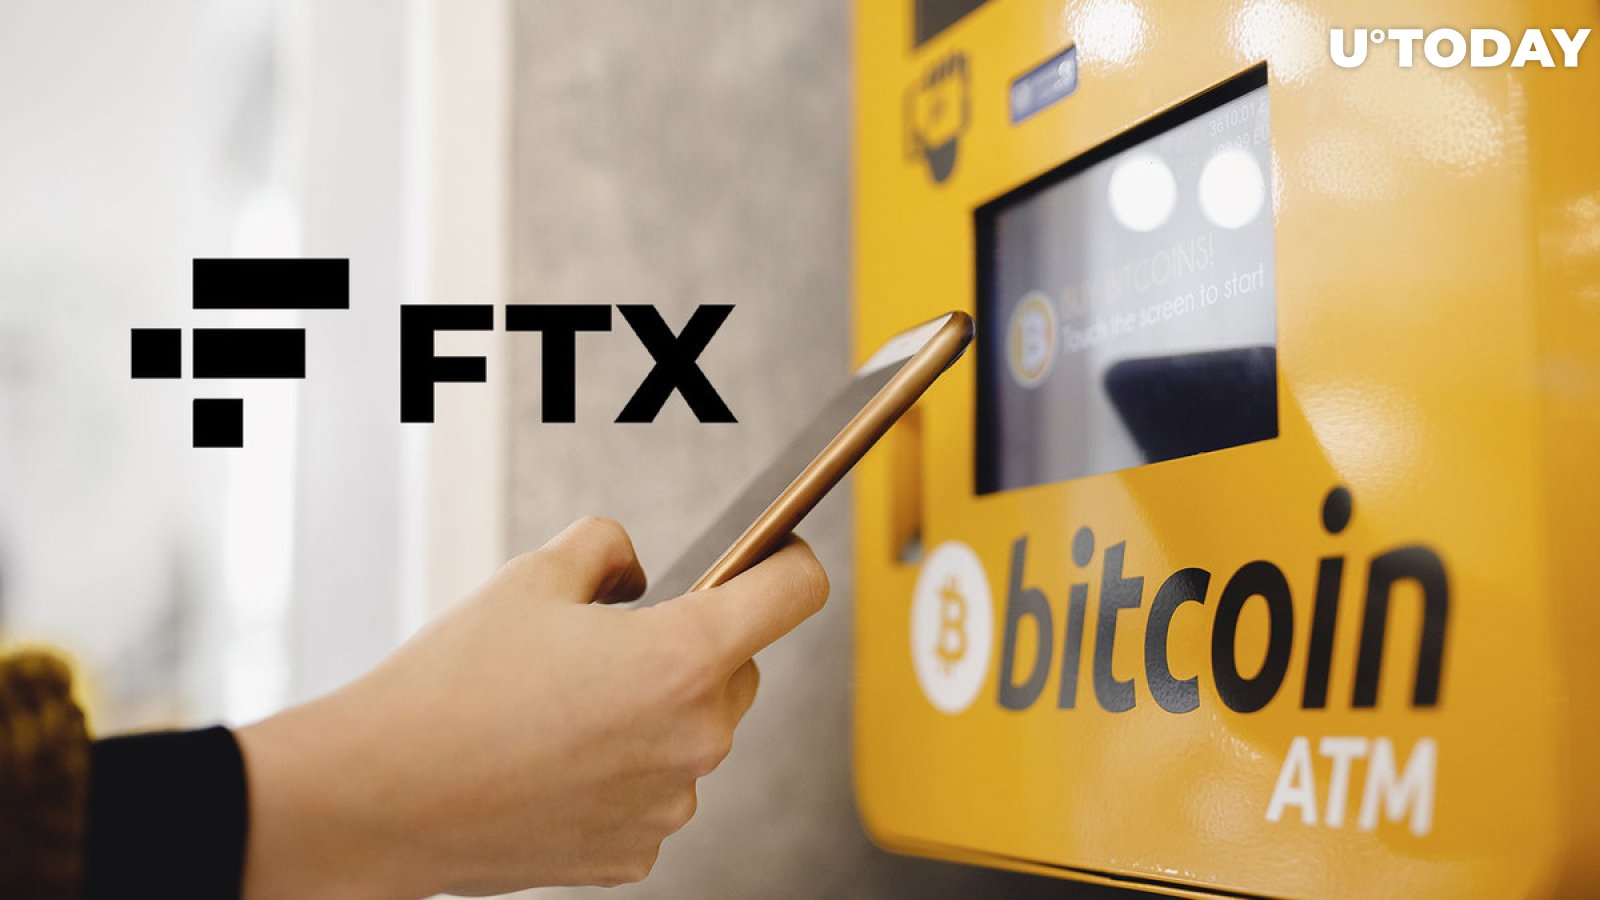 FTX-Linked Asia's Biggest Bitcoin ATM Network and Exchange Ceases Trading